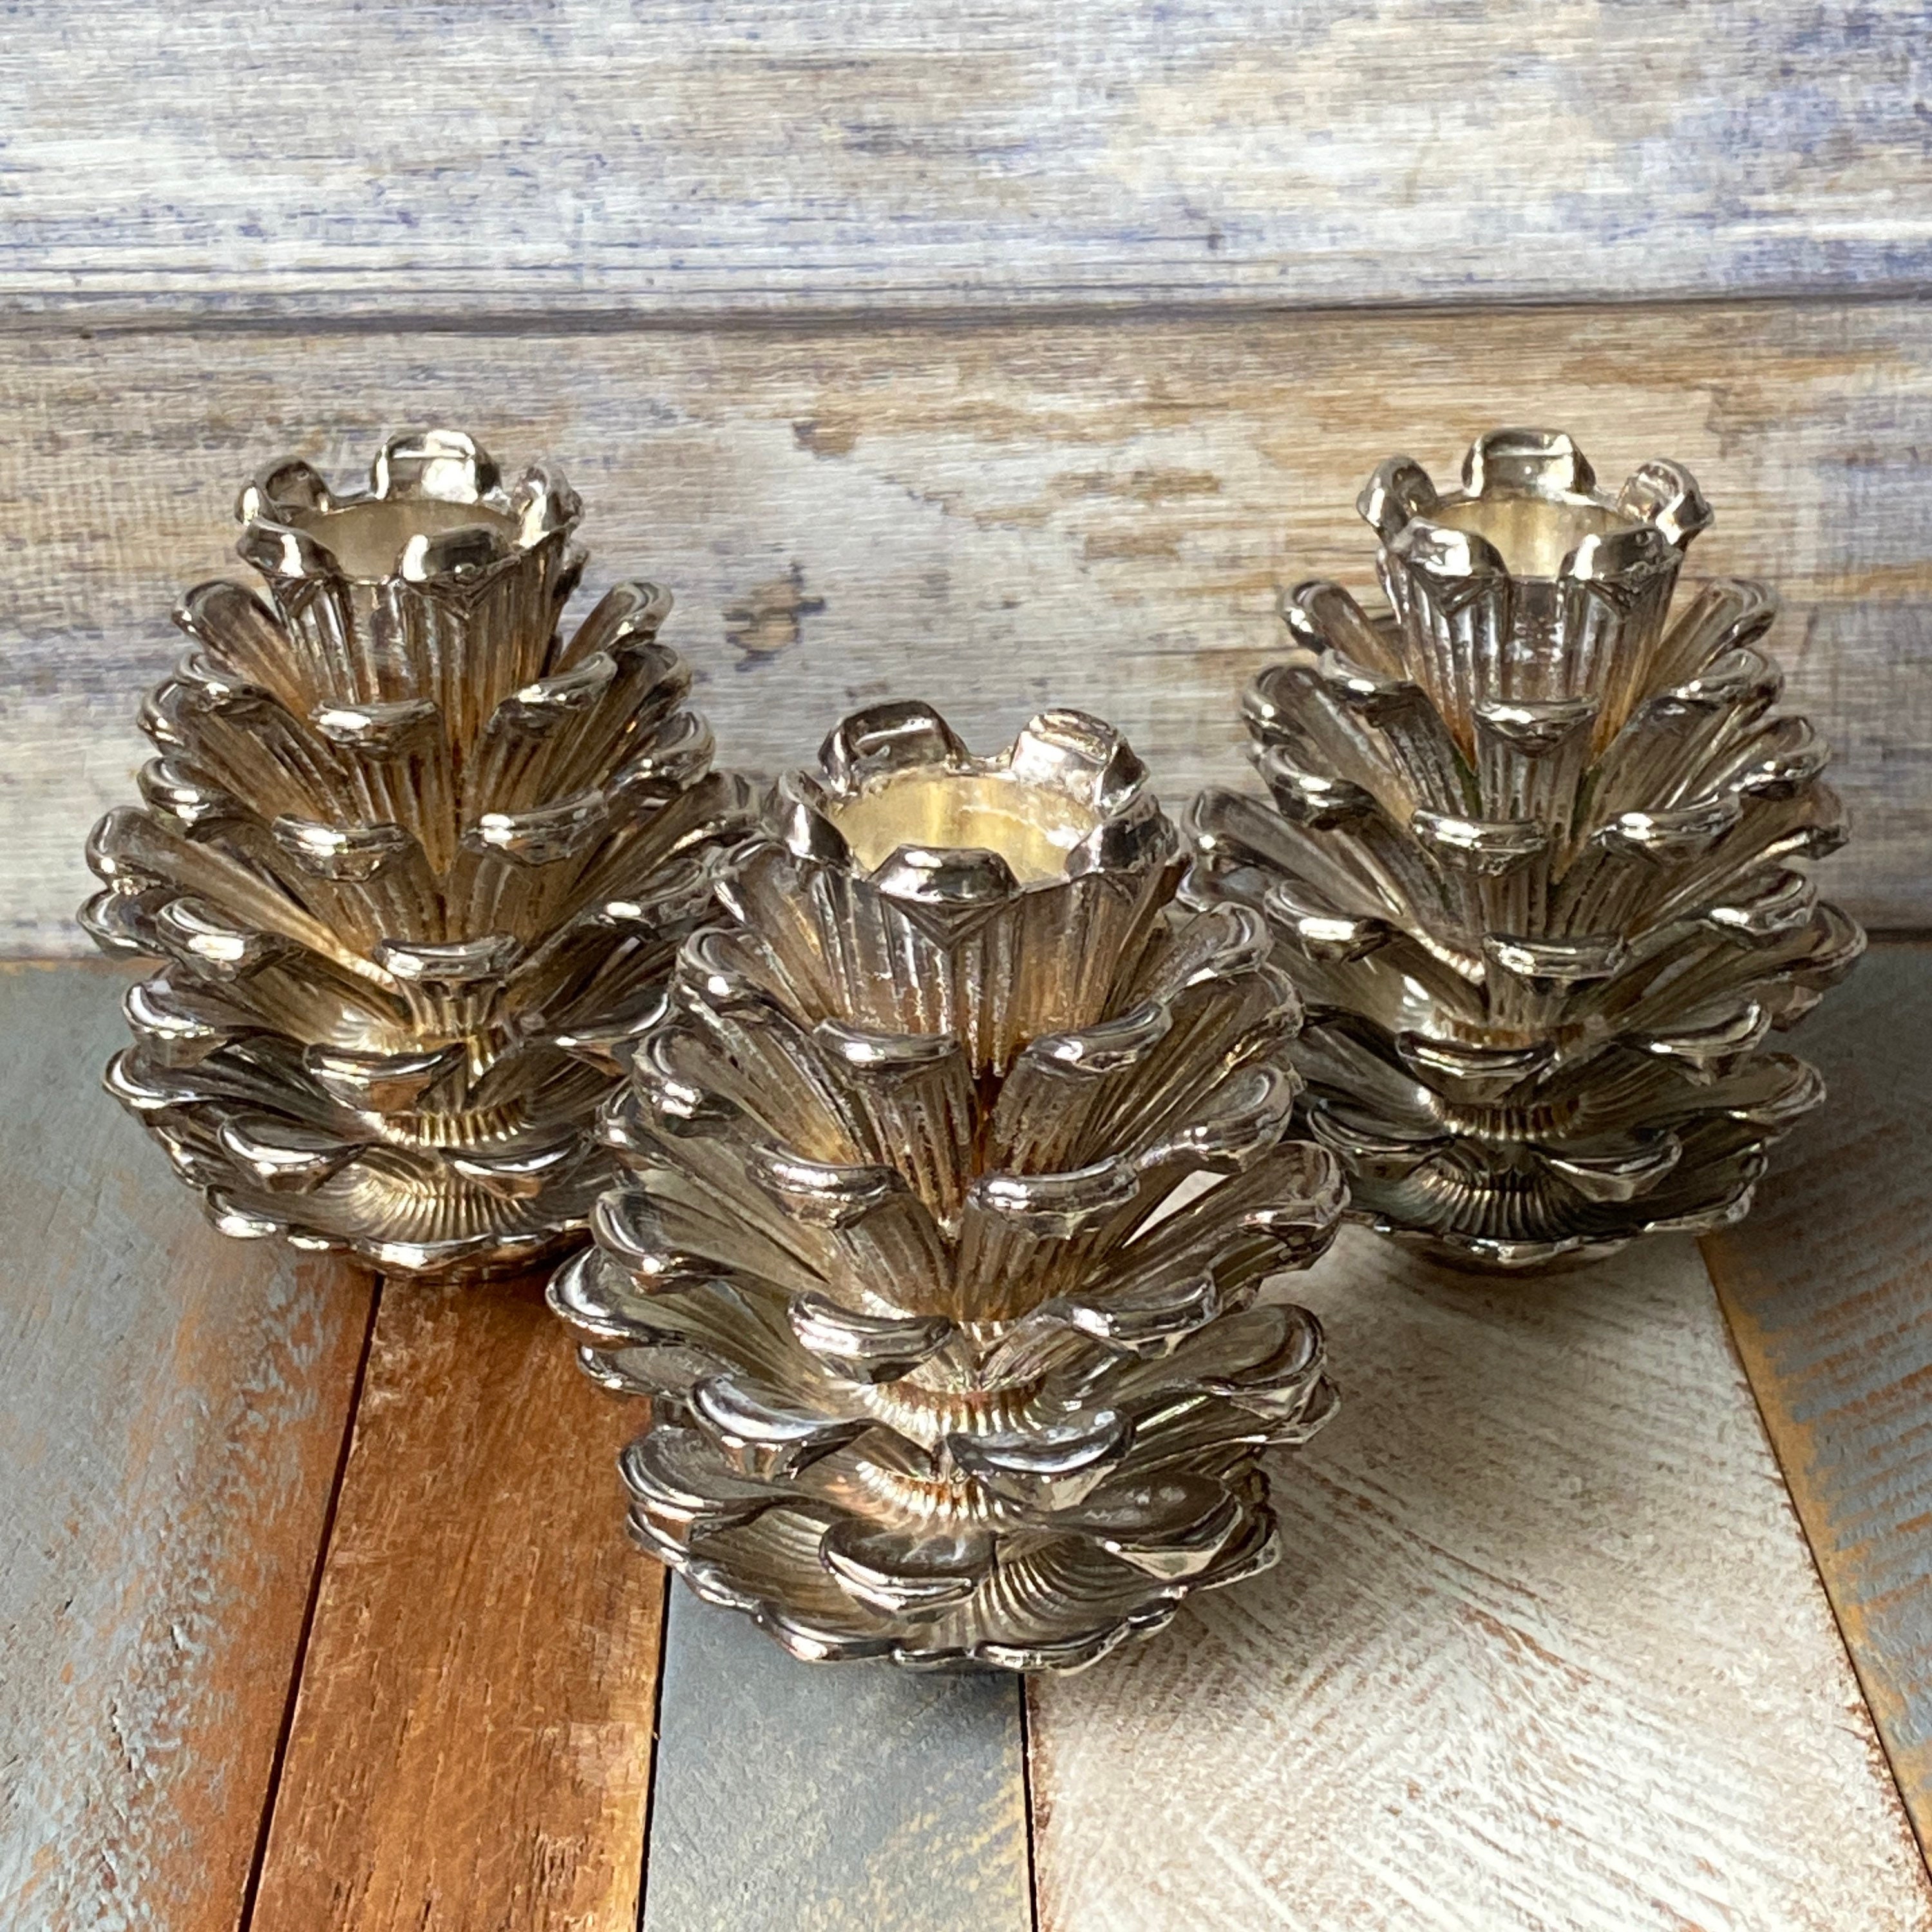 Vintage Silver Plated Pinecone Candlestick Holders Set of Three